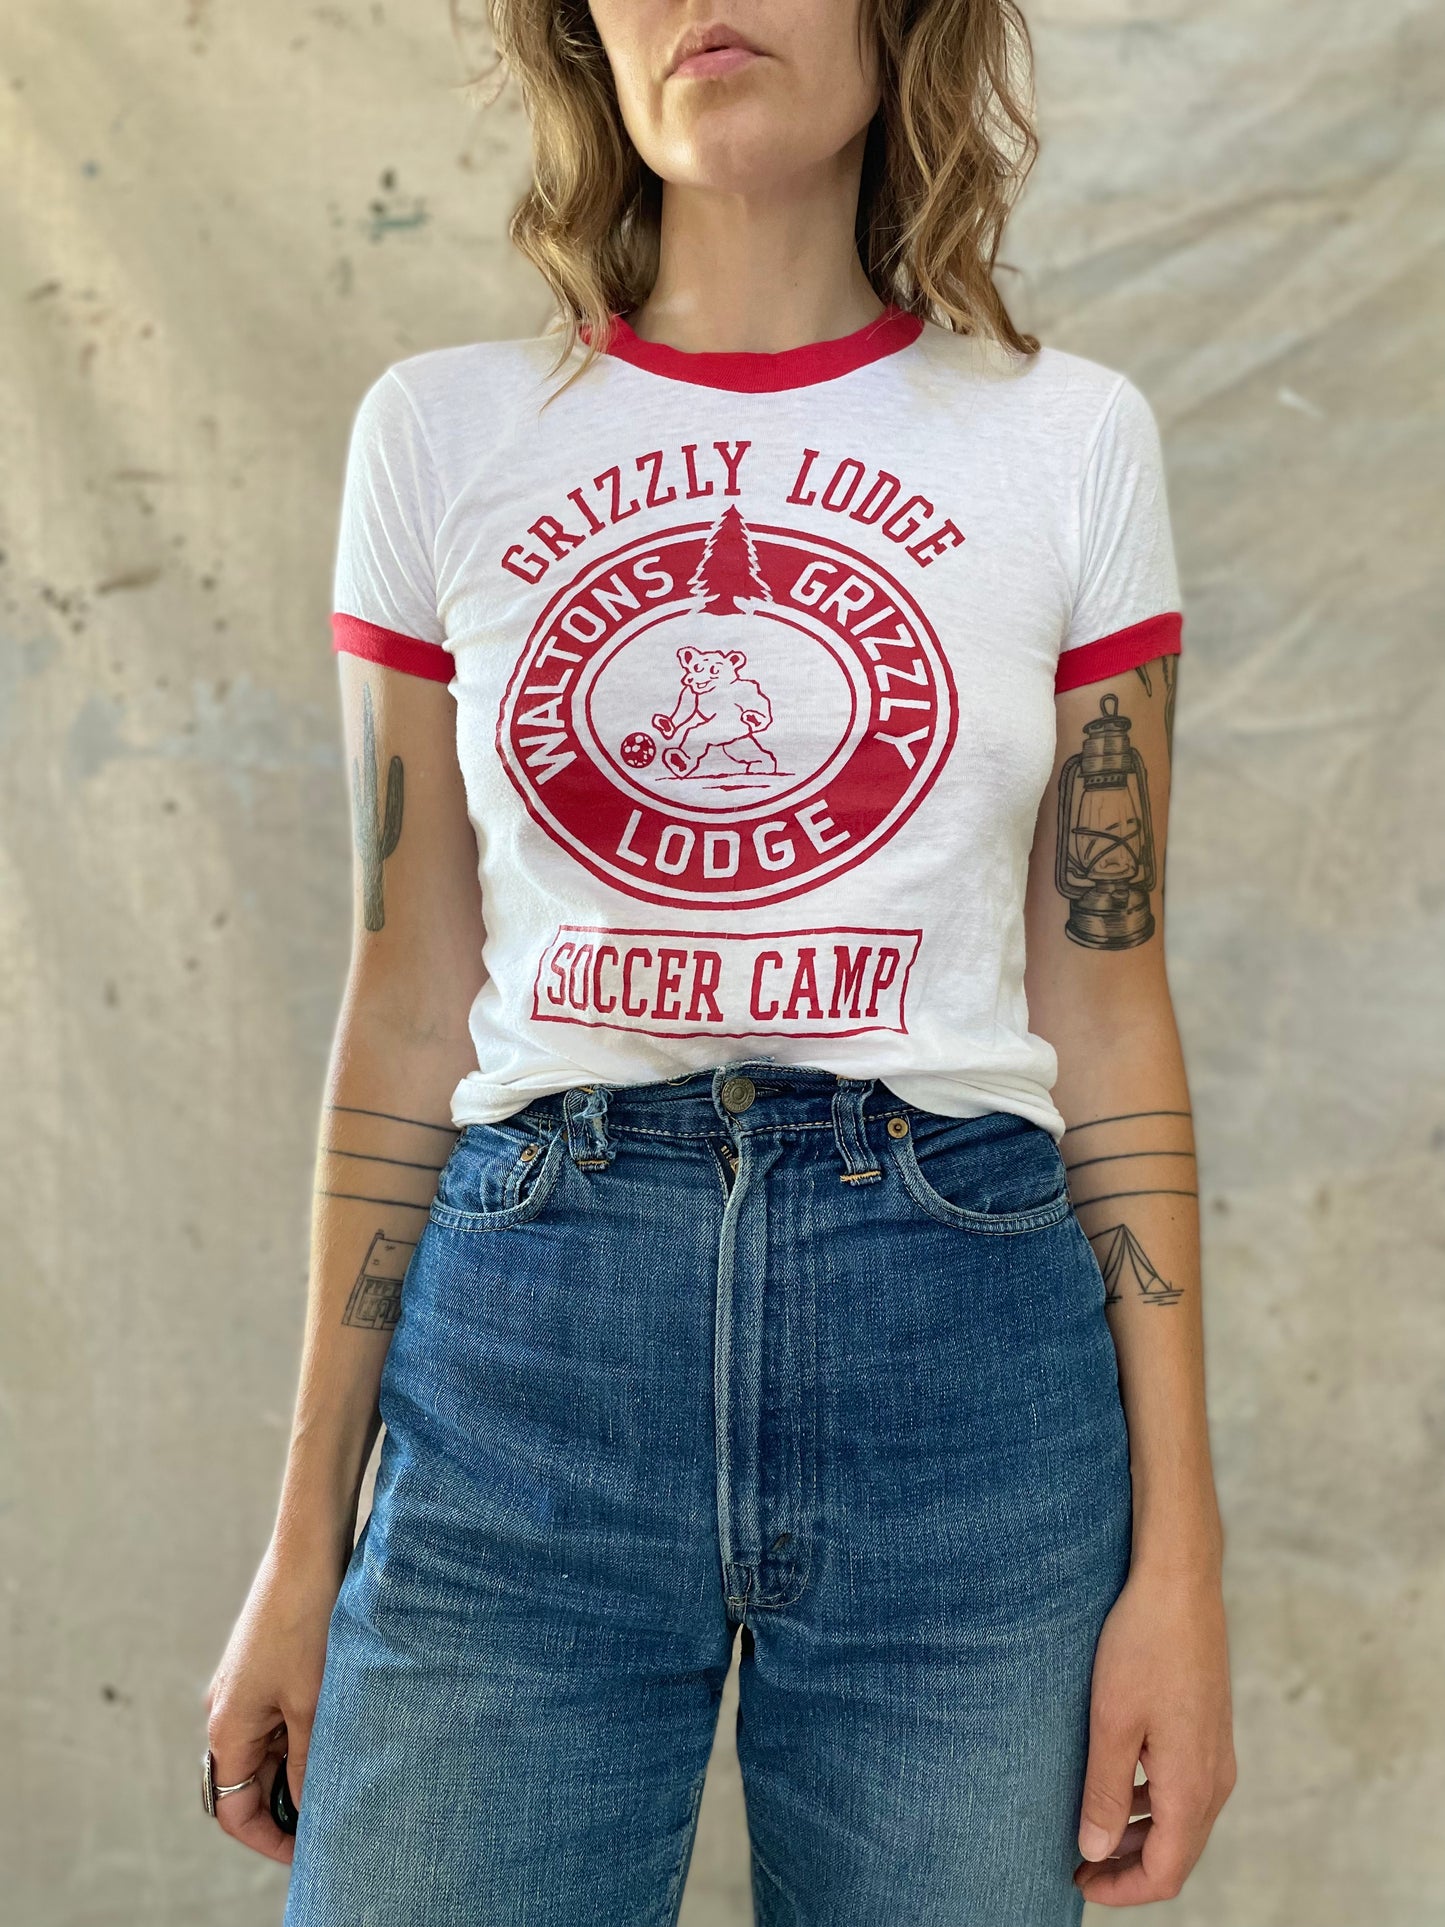 70s Waltons Grizzly Lodge Soccer Camp Ringer Tee